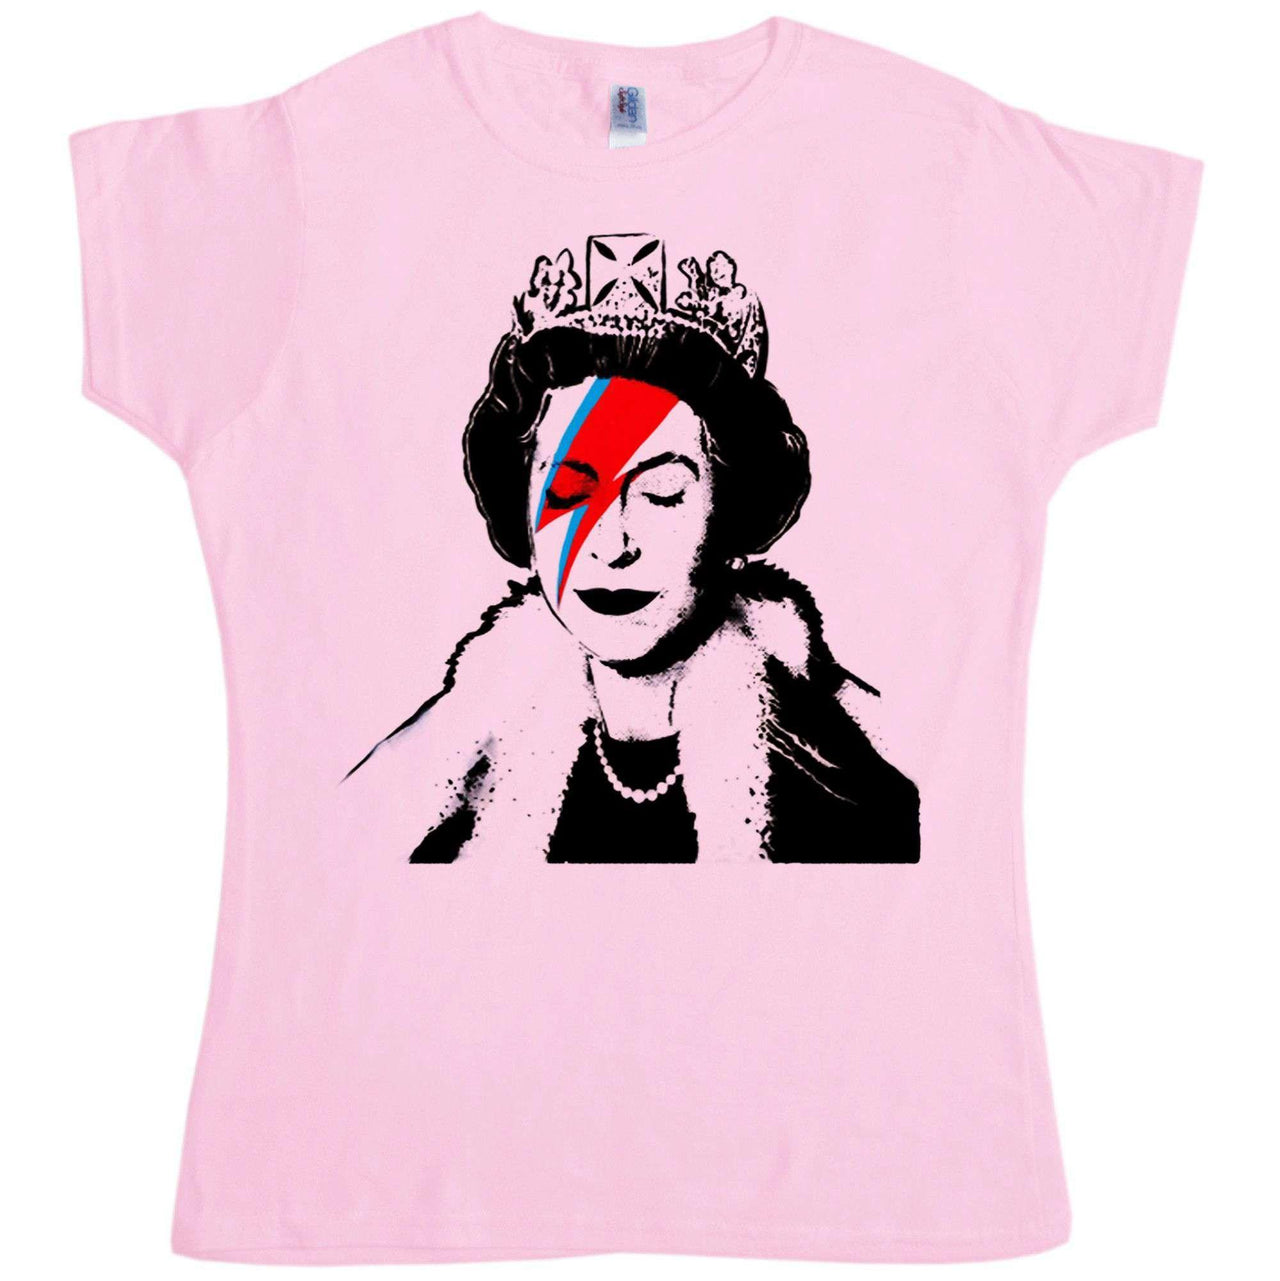 Banksy Lizzy Stardust Fitted Womens T-Shirt 8Ball